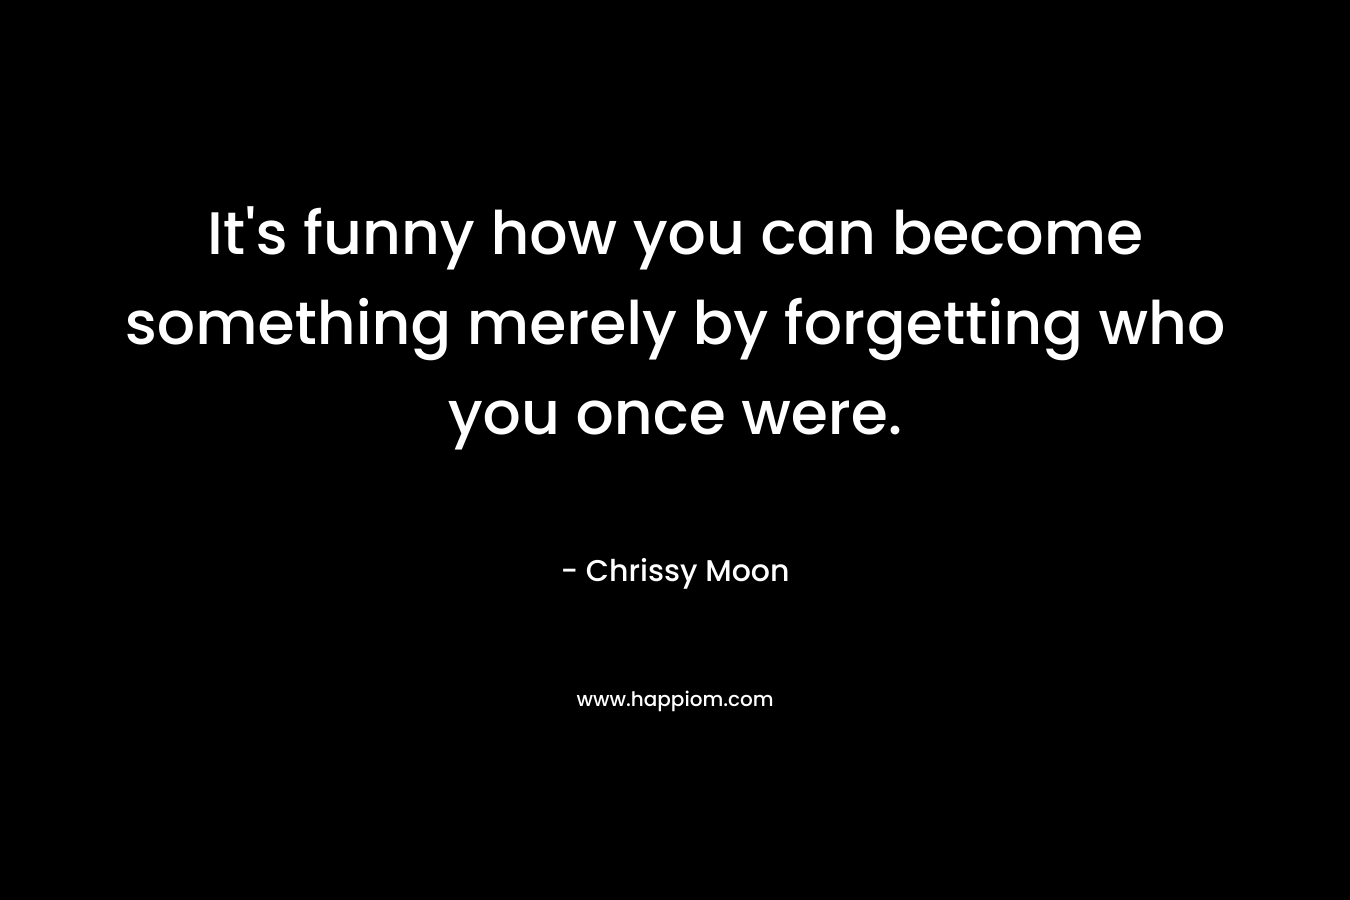 It’s funny how you can become something merely by forgetting who you once were. – Chrissy Moon